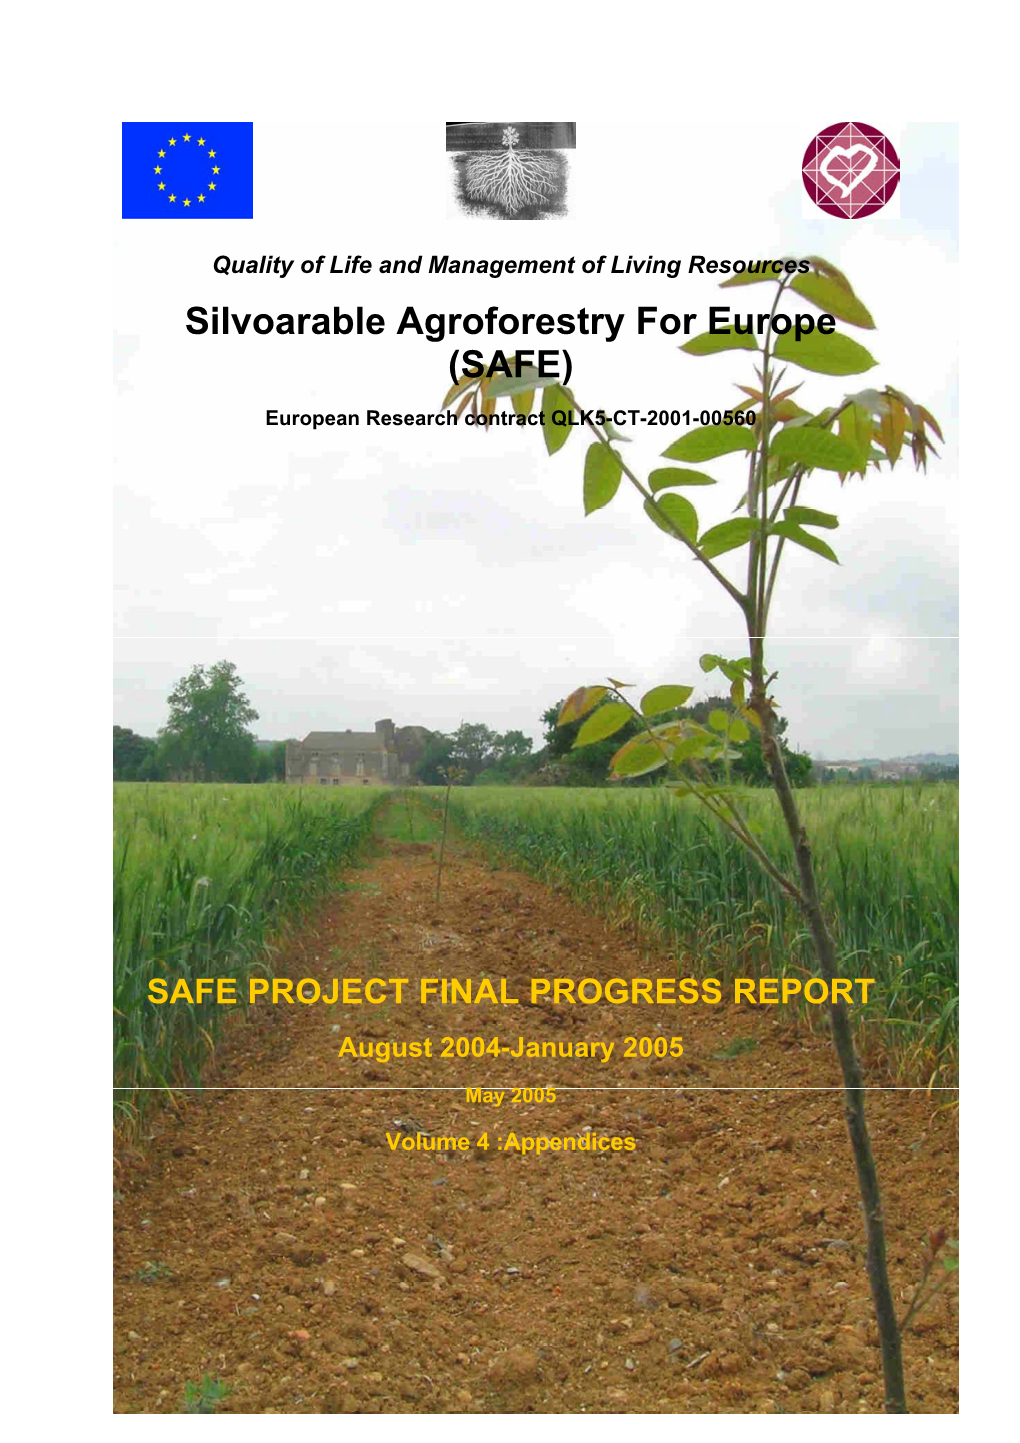 Silvoarable Agroforestry for Europe (SAFE)